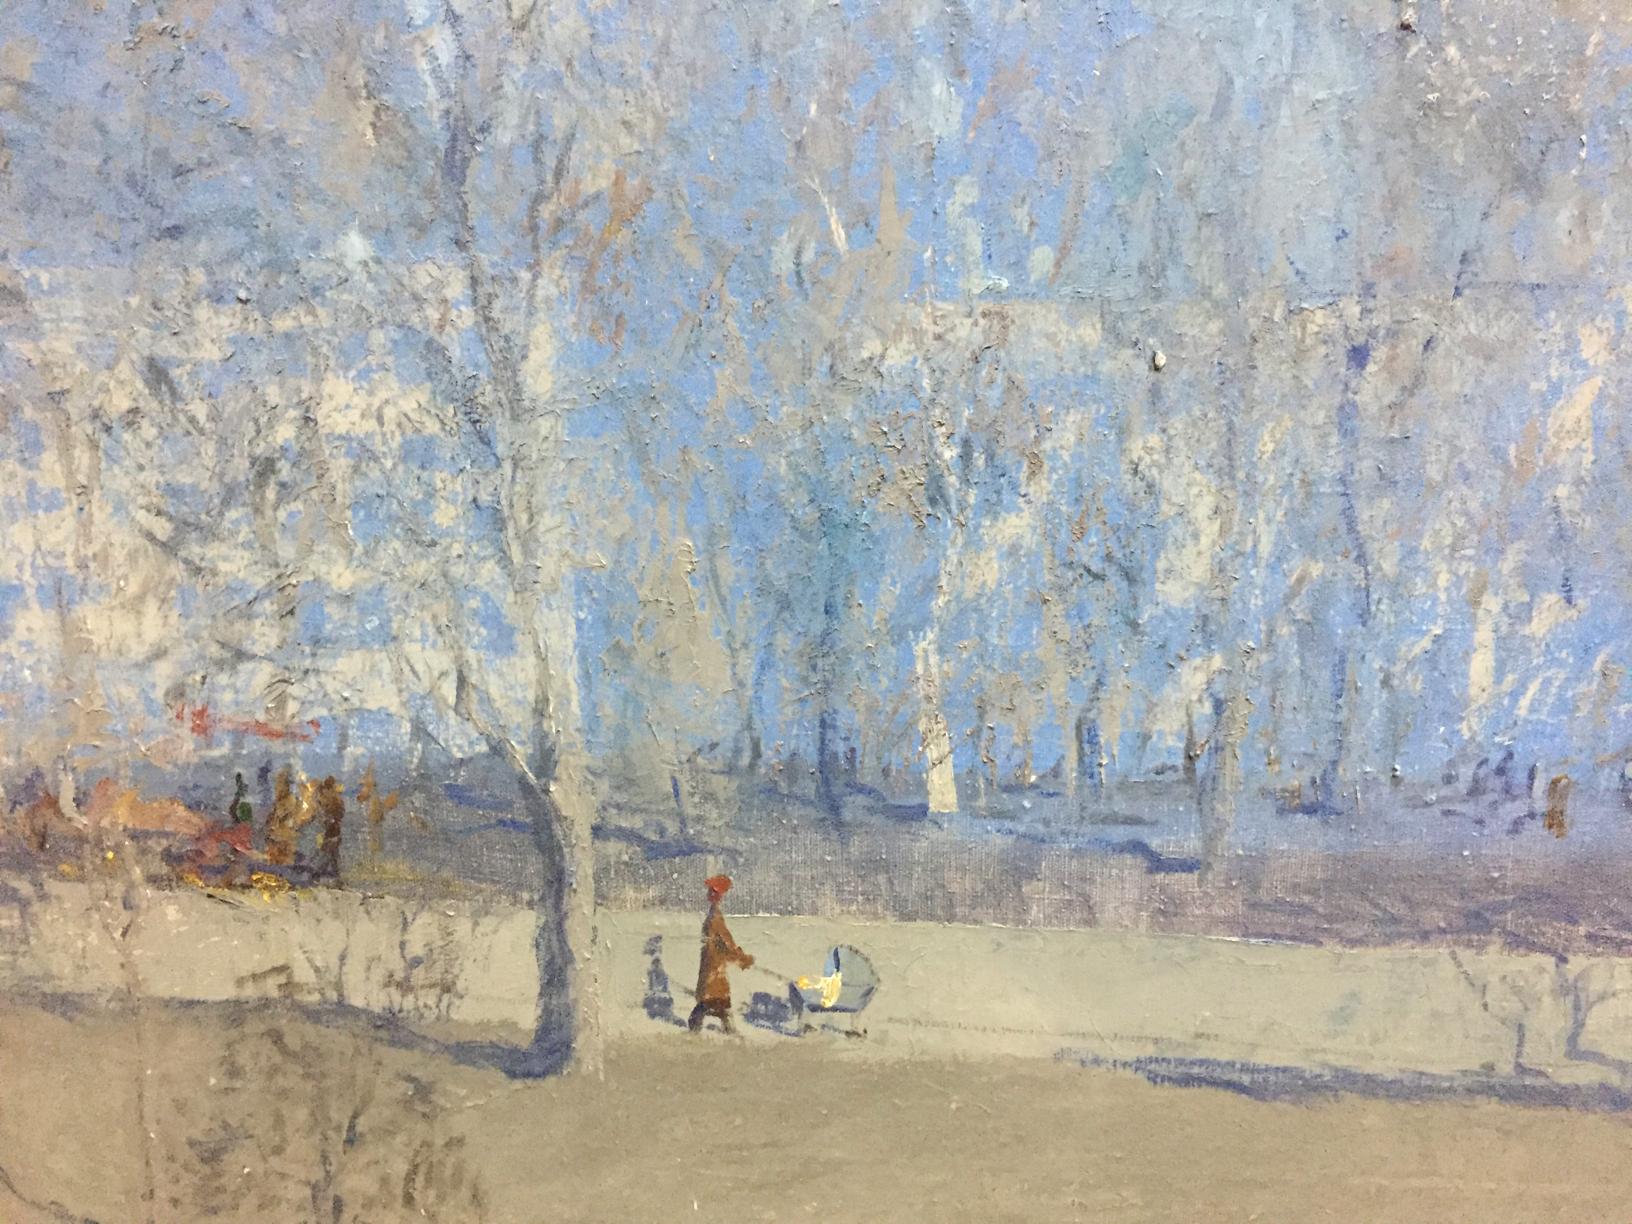 Alexey Fedorovich Vlasov's oil painting depicts a blue spring